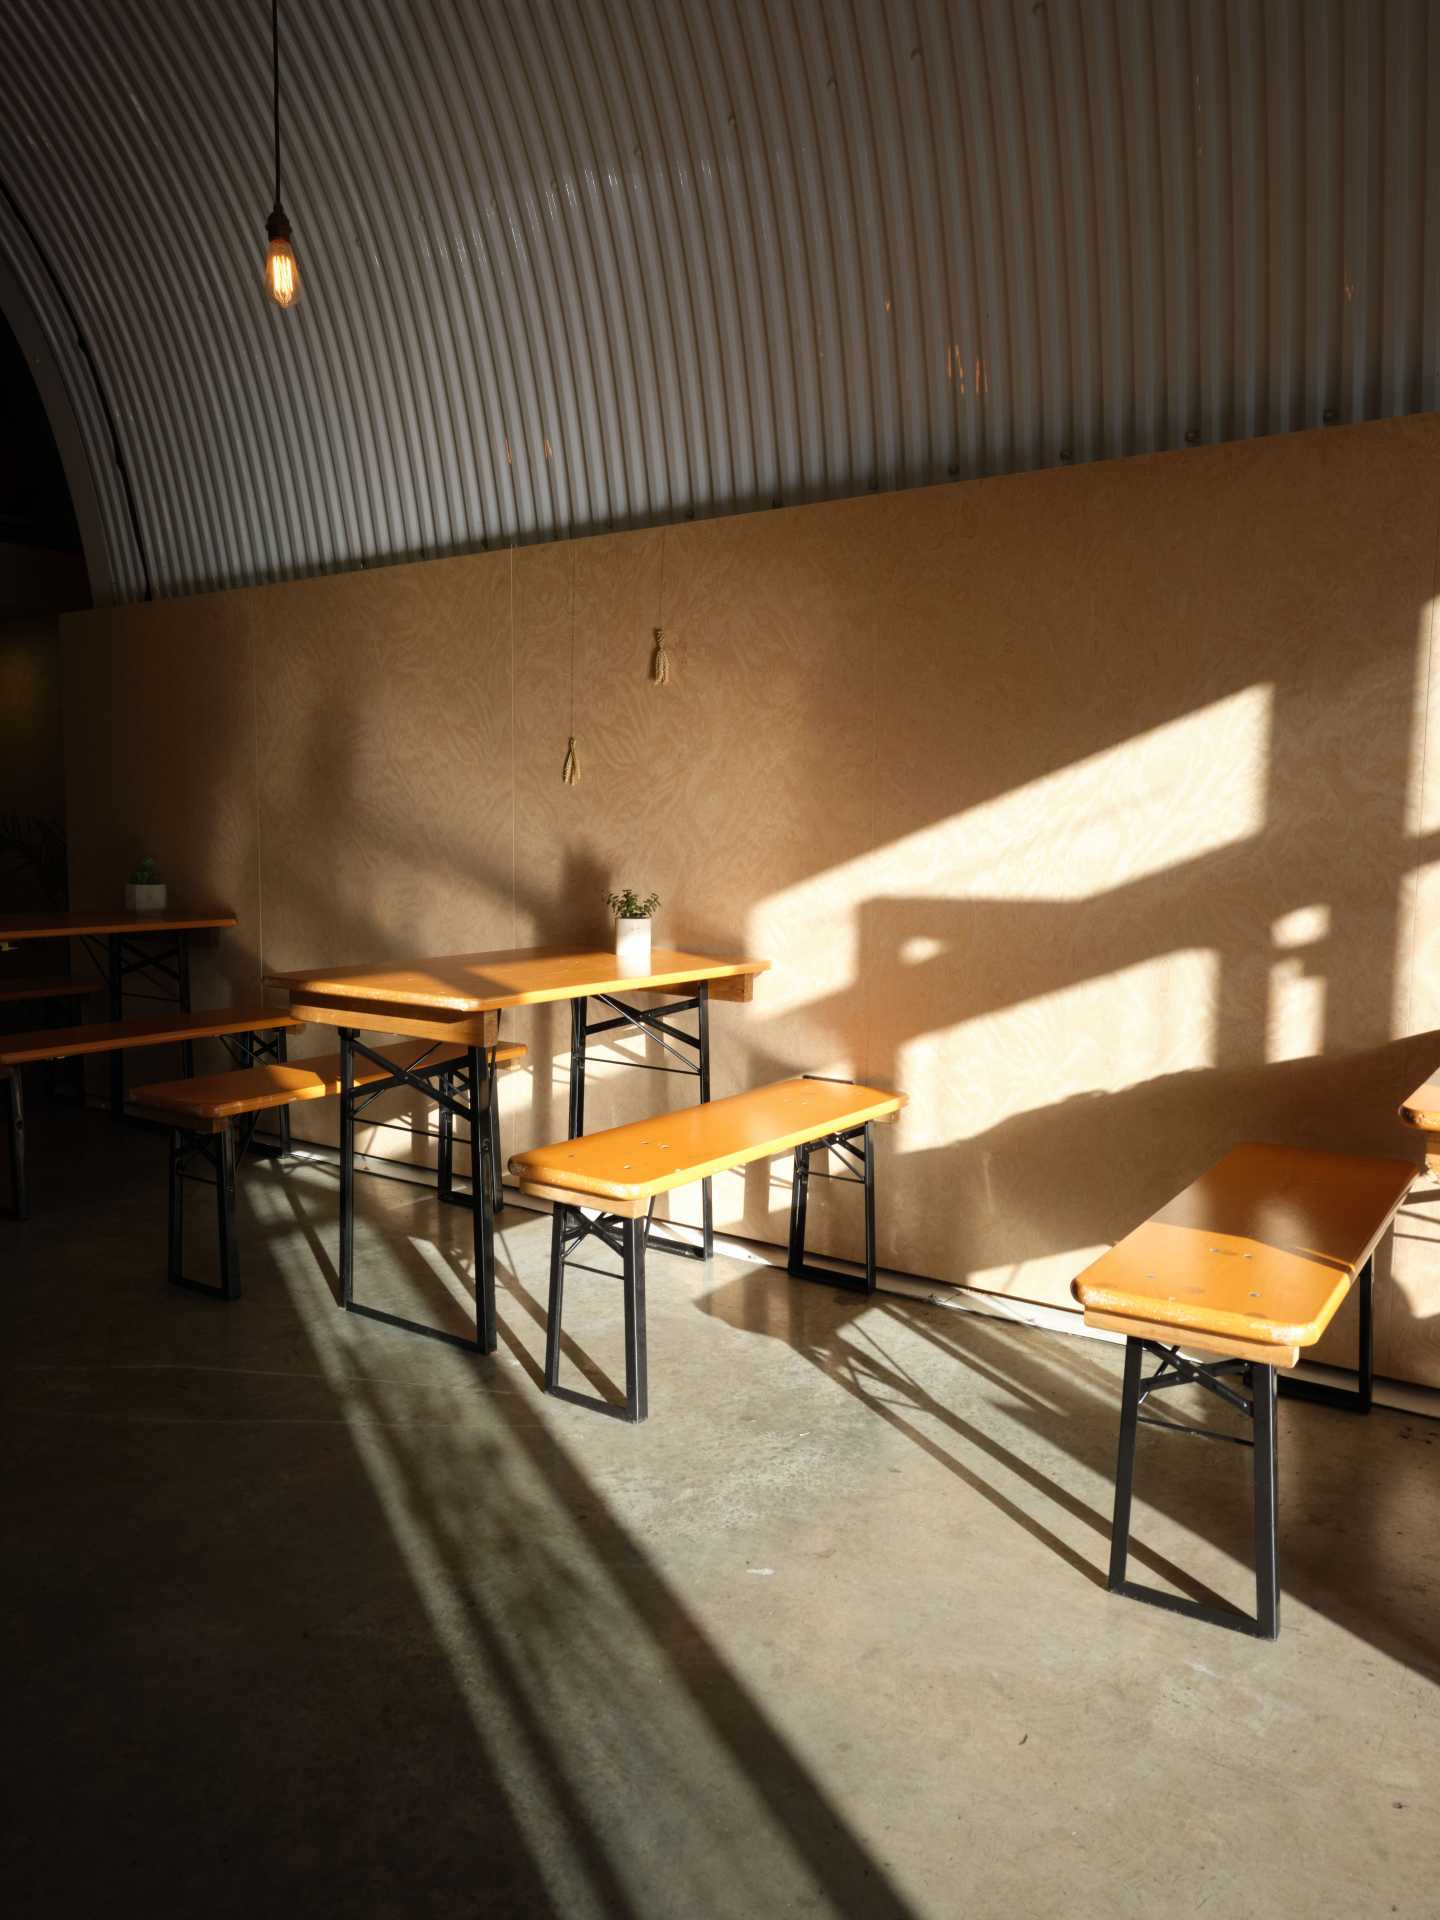 The interiors at Villages Brewery in Deptford, London